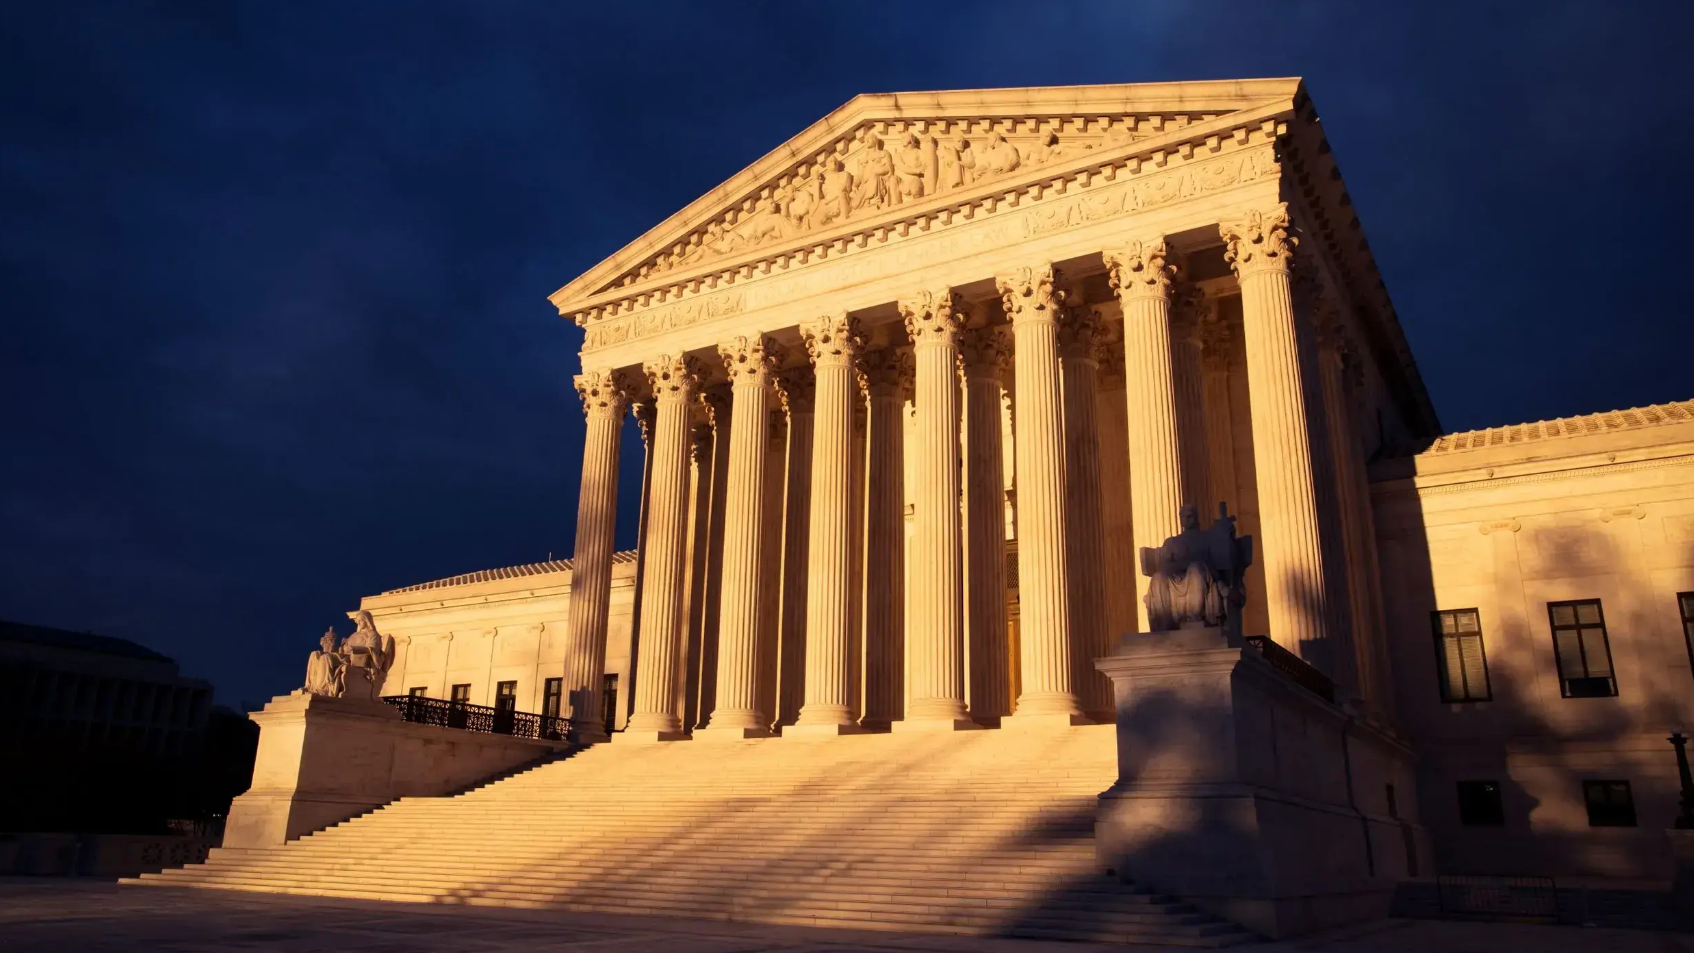 Following the Supreme Court's ruling on Dobbs v. Jackson, Americans in a number of states are expected to face changes in access to reproductive health resources. VCU experts share what impacts they expect from this Supreme Court decision. (Getty Images)